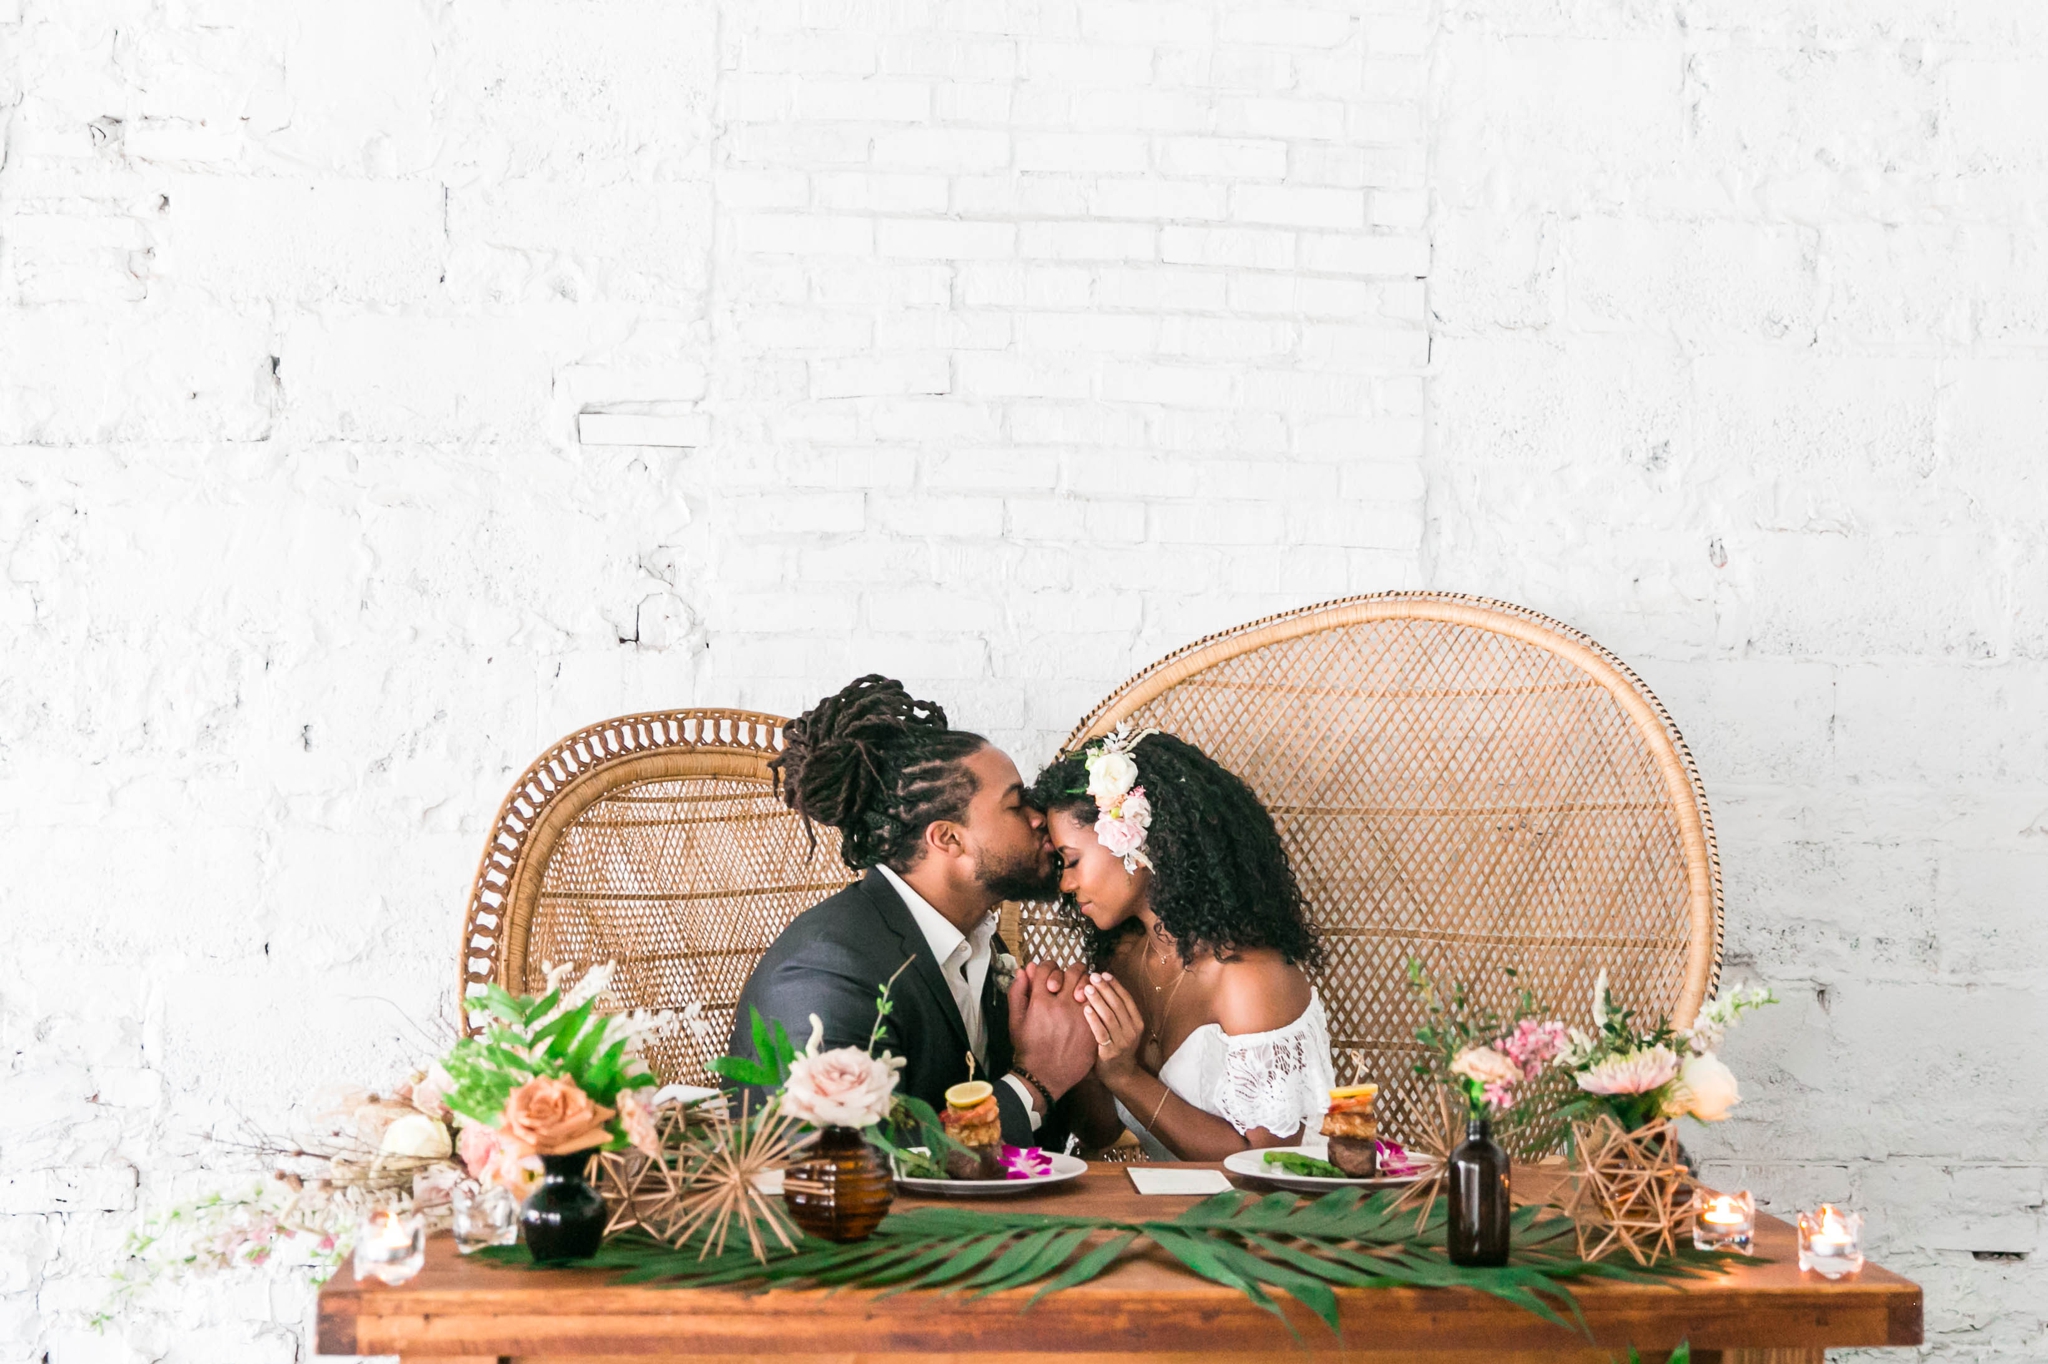  Bride and groom at the sweetheart table at their wedding reception sitting in Midcentury Woven Wicker Peacock Chairs - Black Love - Tropical Destination Wedding Inspiration - Oahu Hawaii Wedding Photography - indoor natural light photographer 